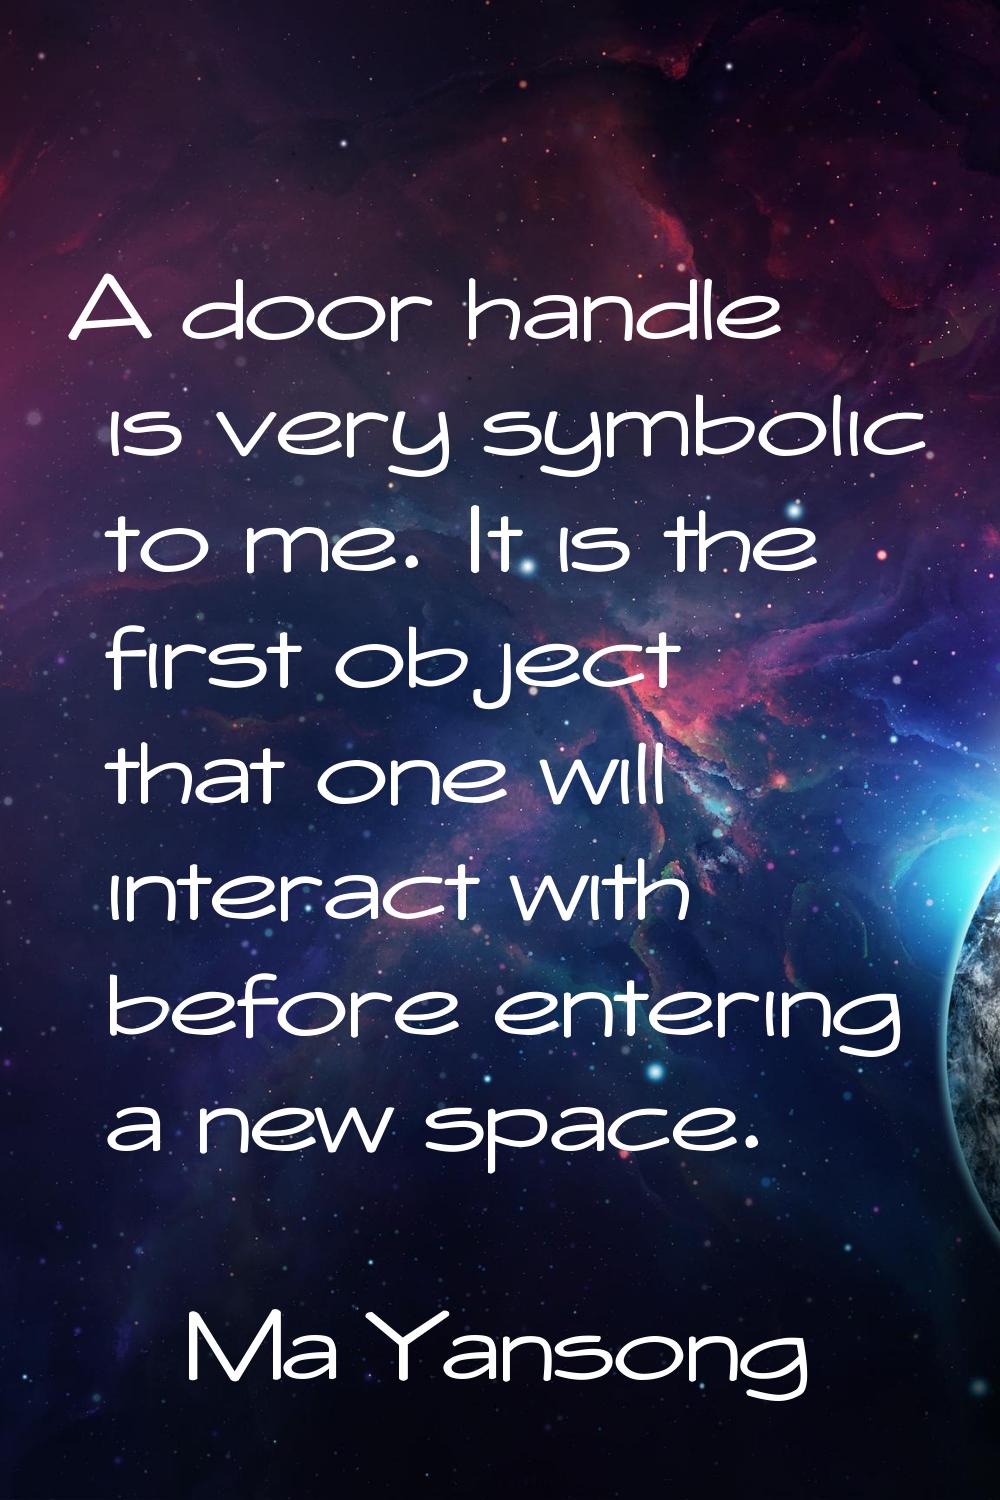 A door handle is very symbolic to me. It is the first object that one will interact with before ent